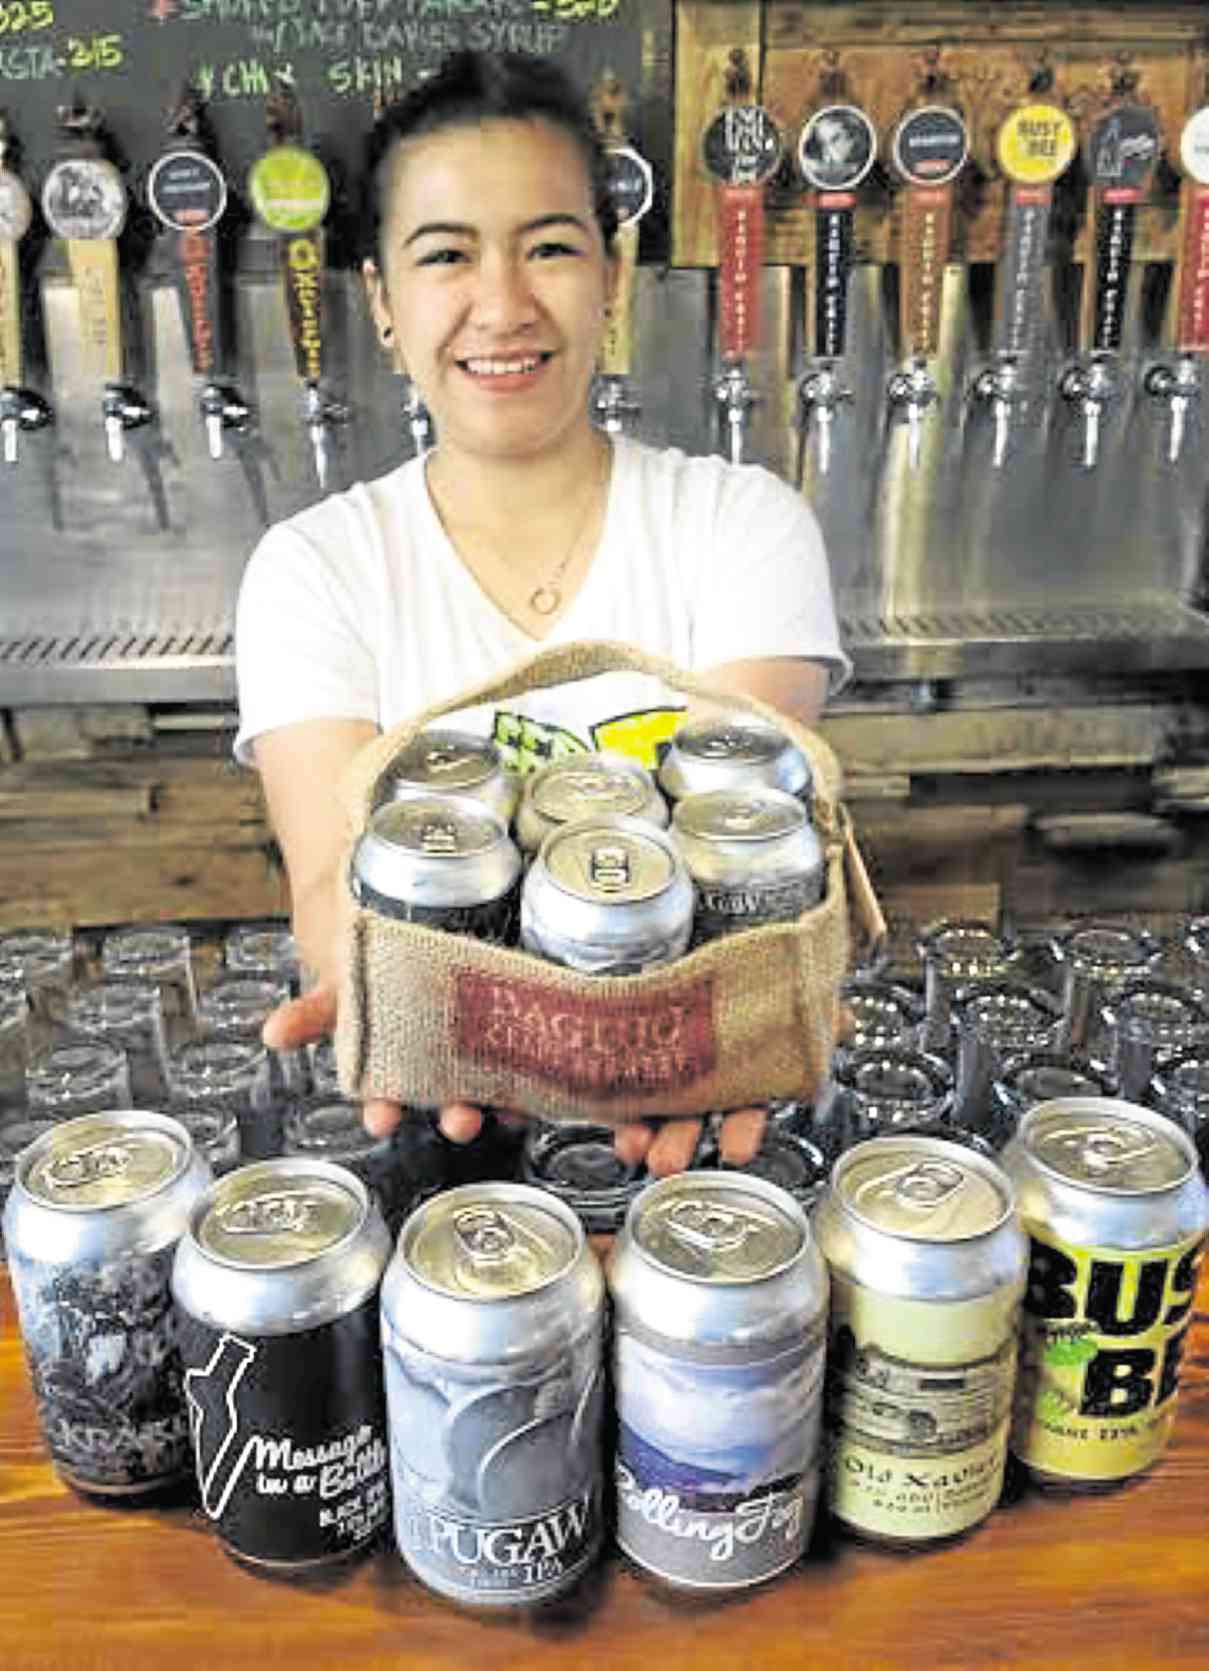 BEER in cans for takeout with names of figures in Cordillera legends